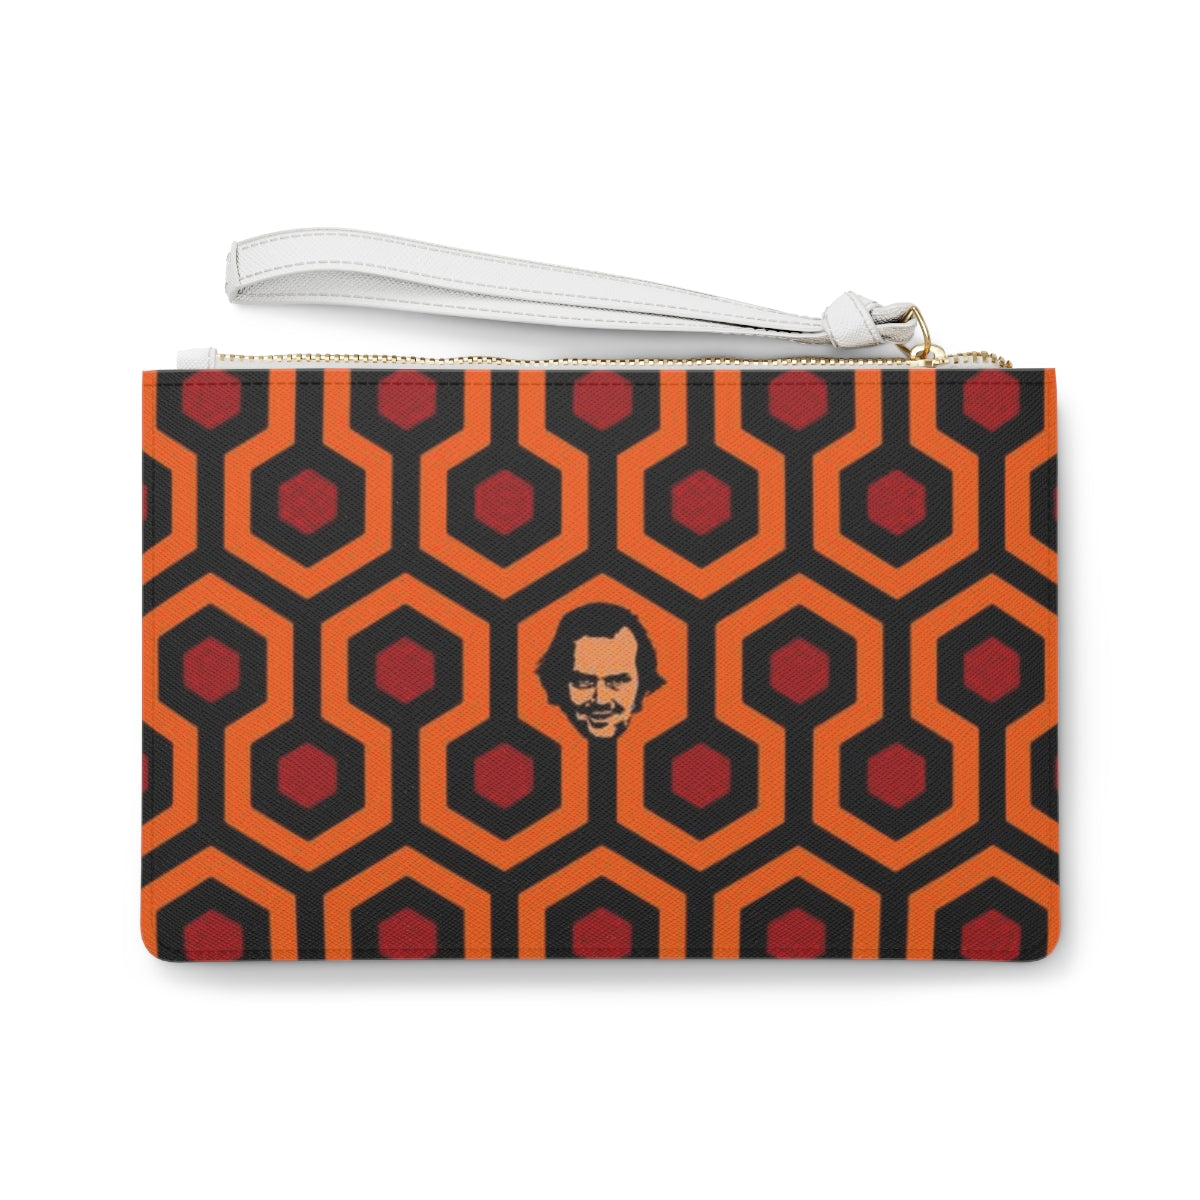 Redrum 237 Smiley face - The Shining | Wristlet Wallet Clutch Bag